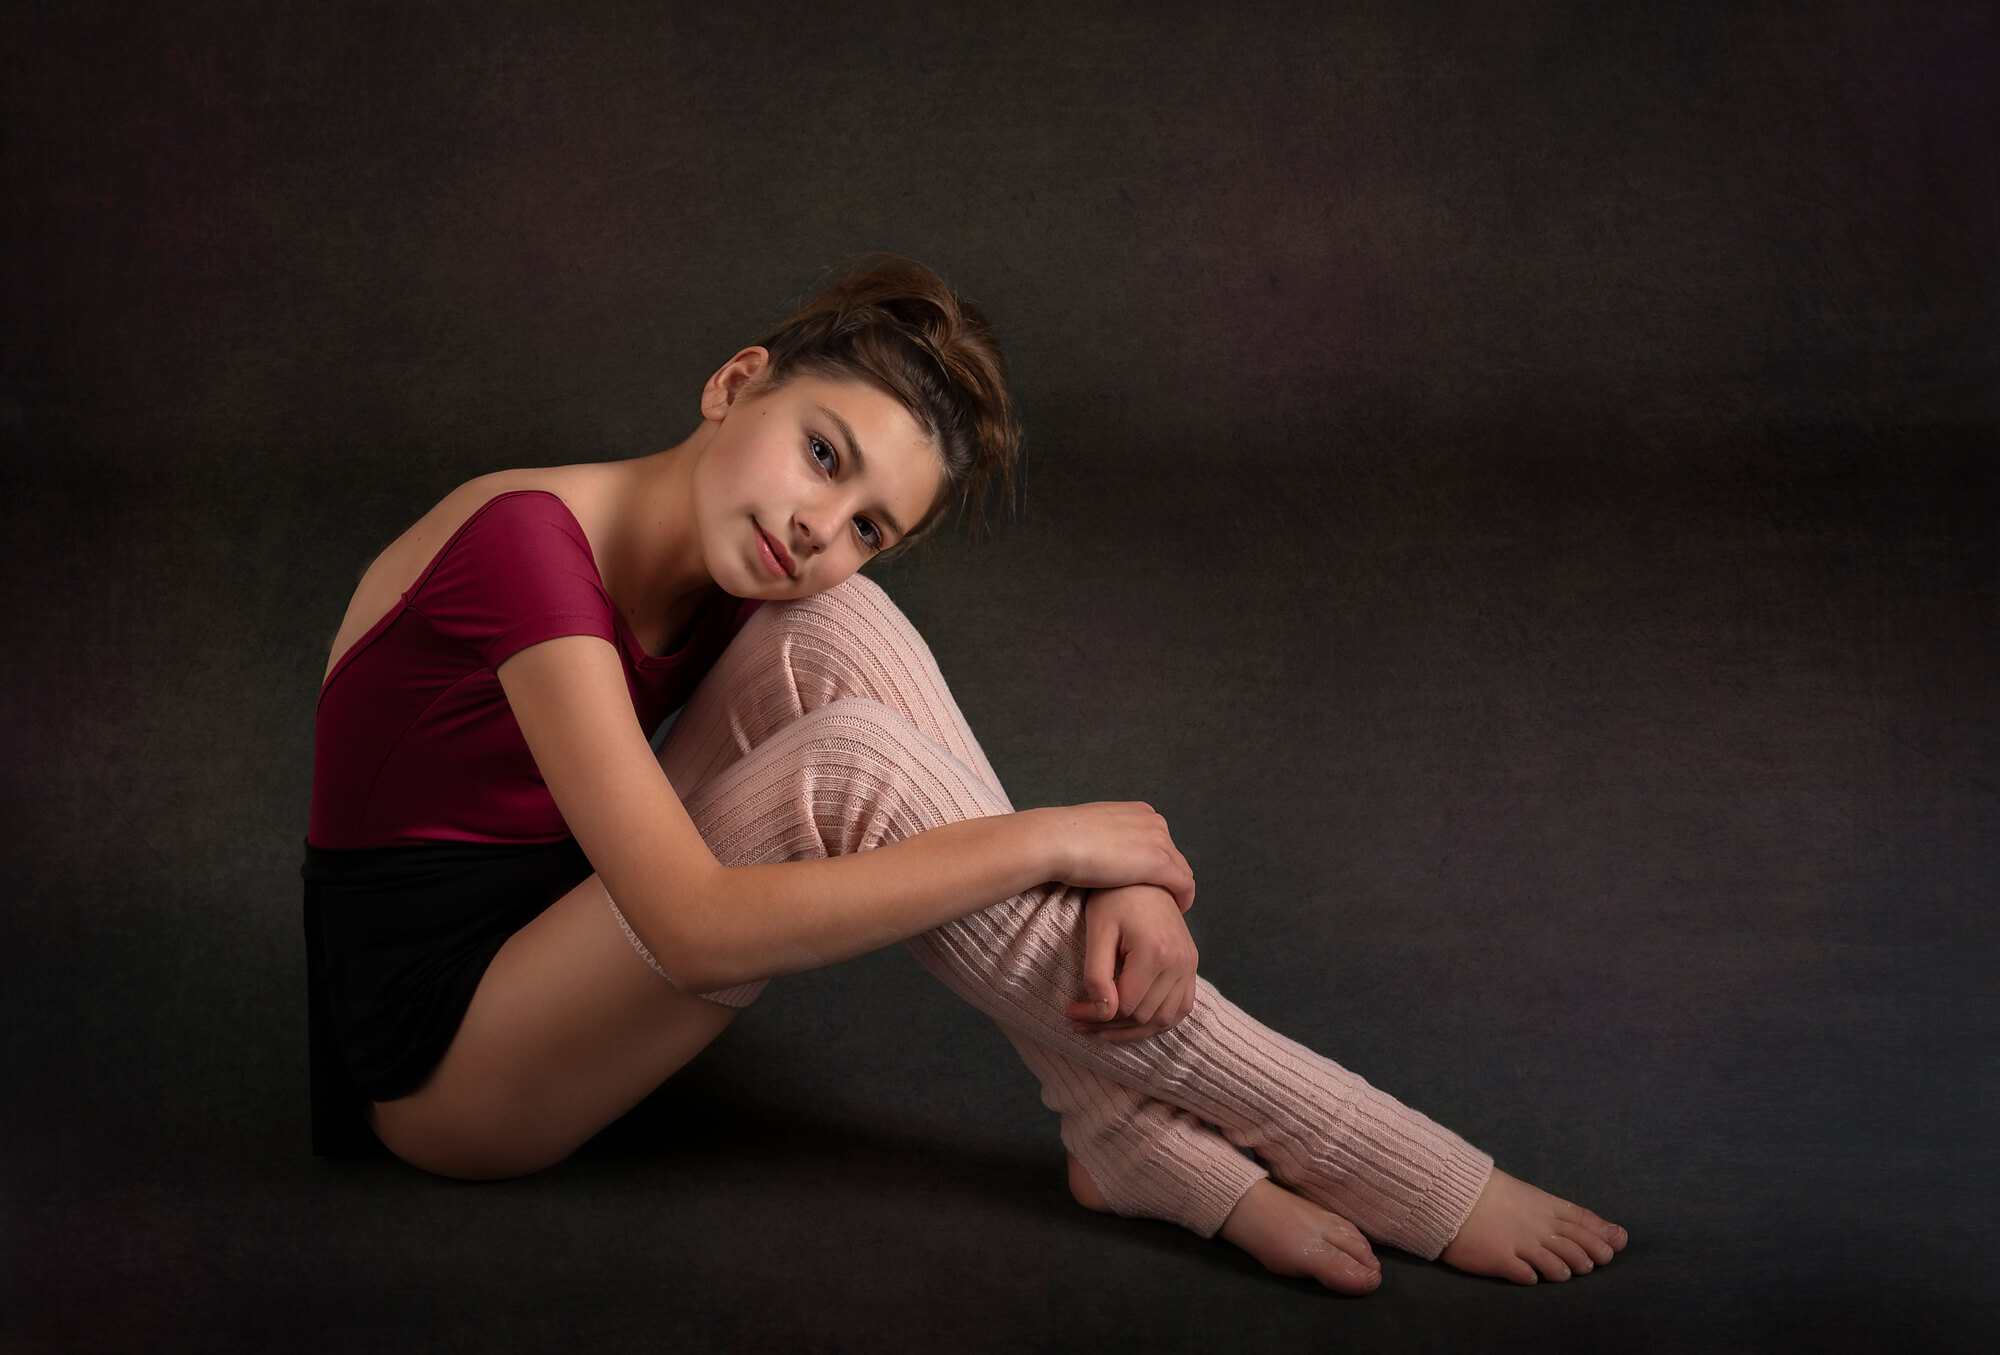 dancer girl resting head on knees in leg warmers and leotard